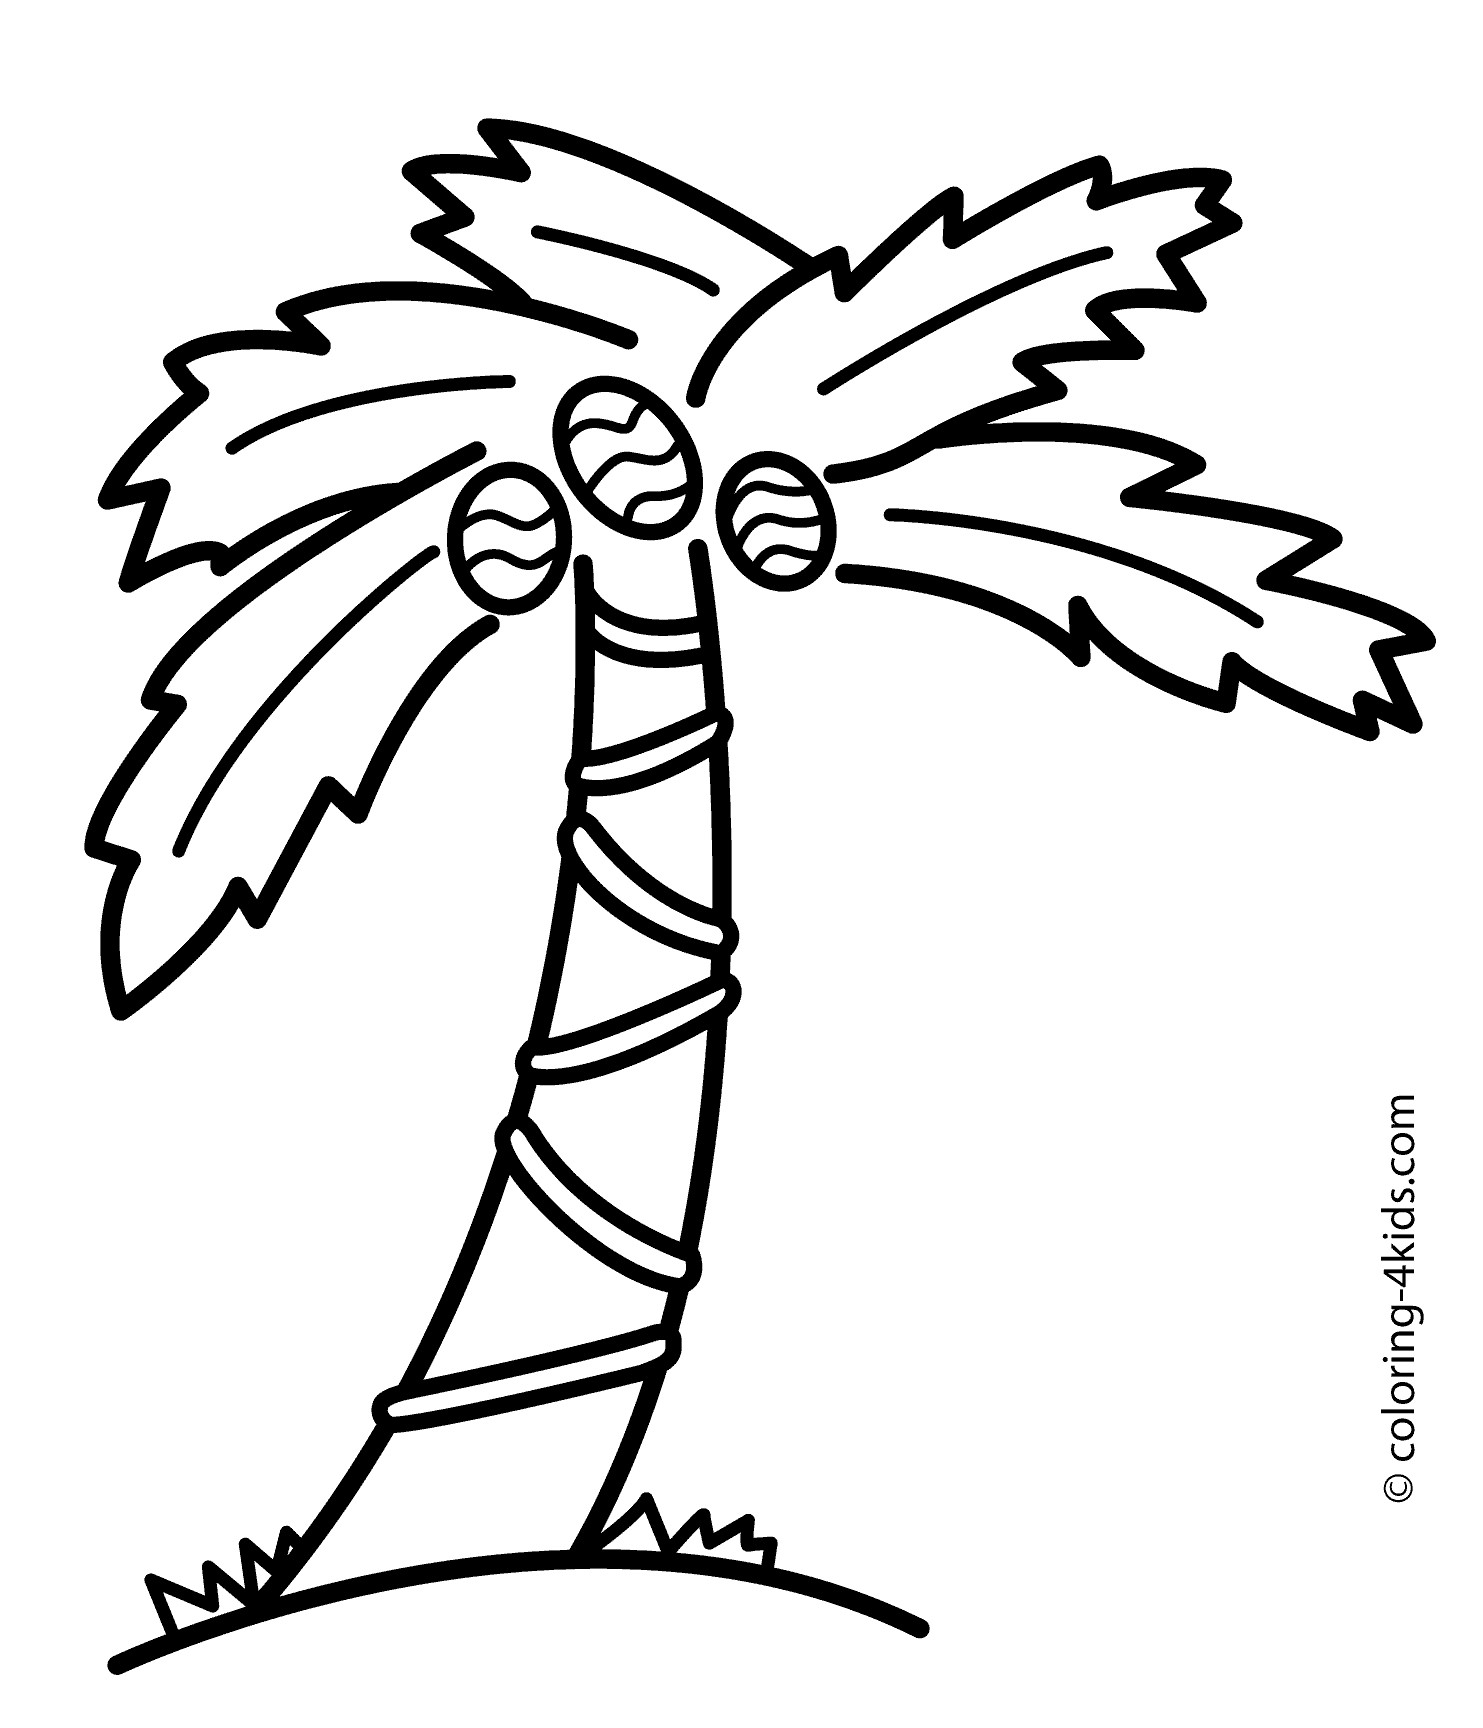 1483x1728 Nature Palm Tree Coloring Page For Kids Printable Free Bright.